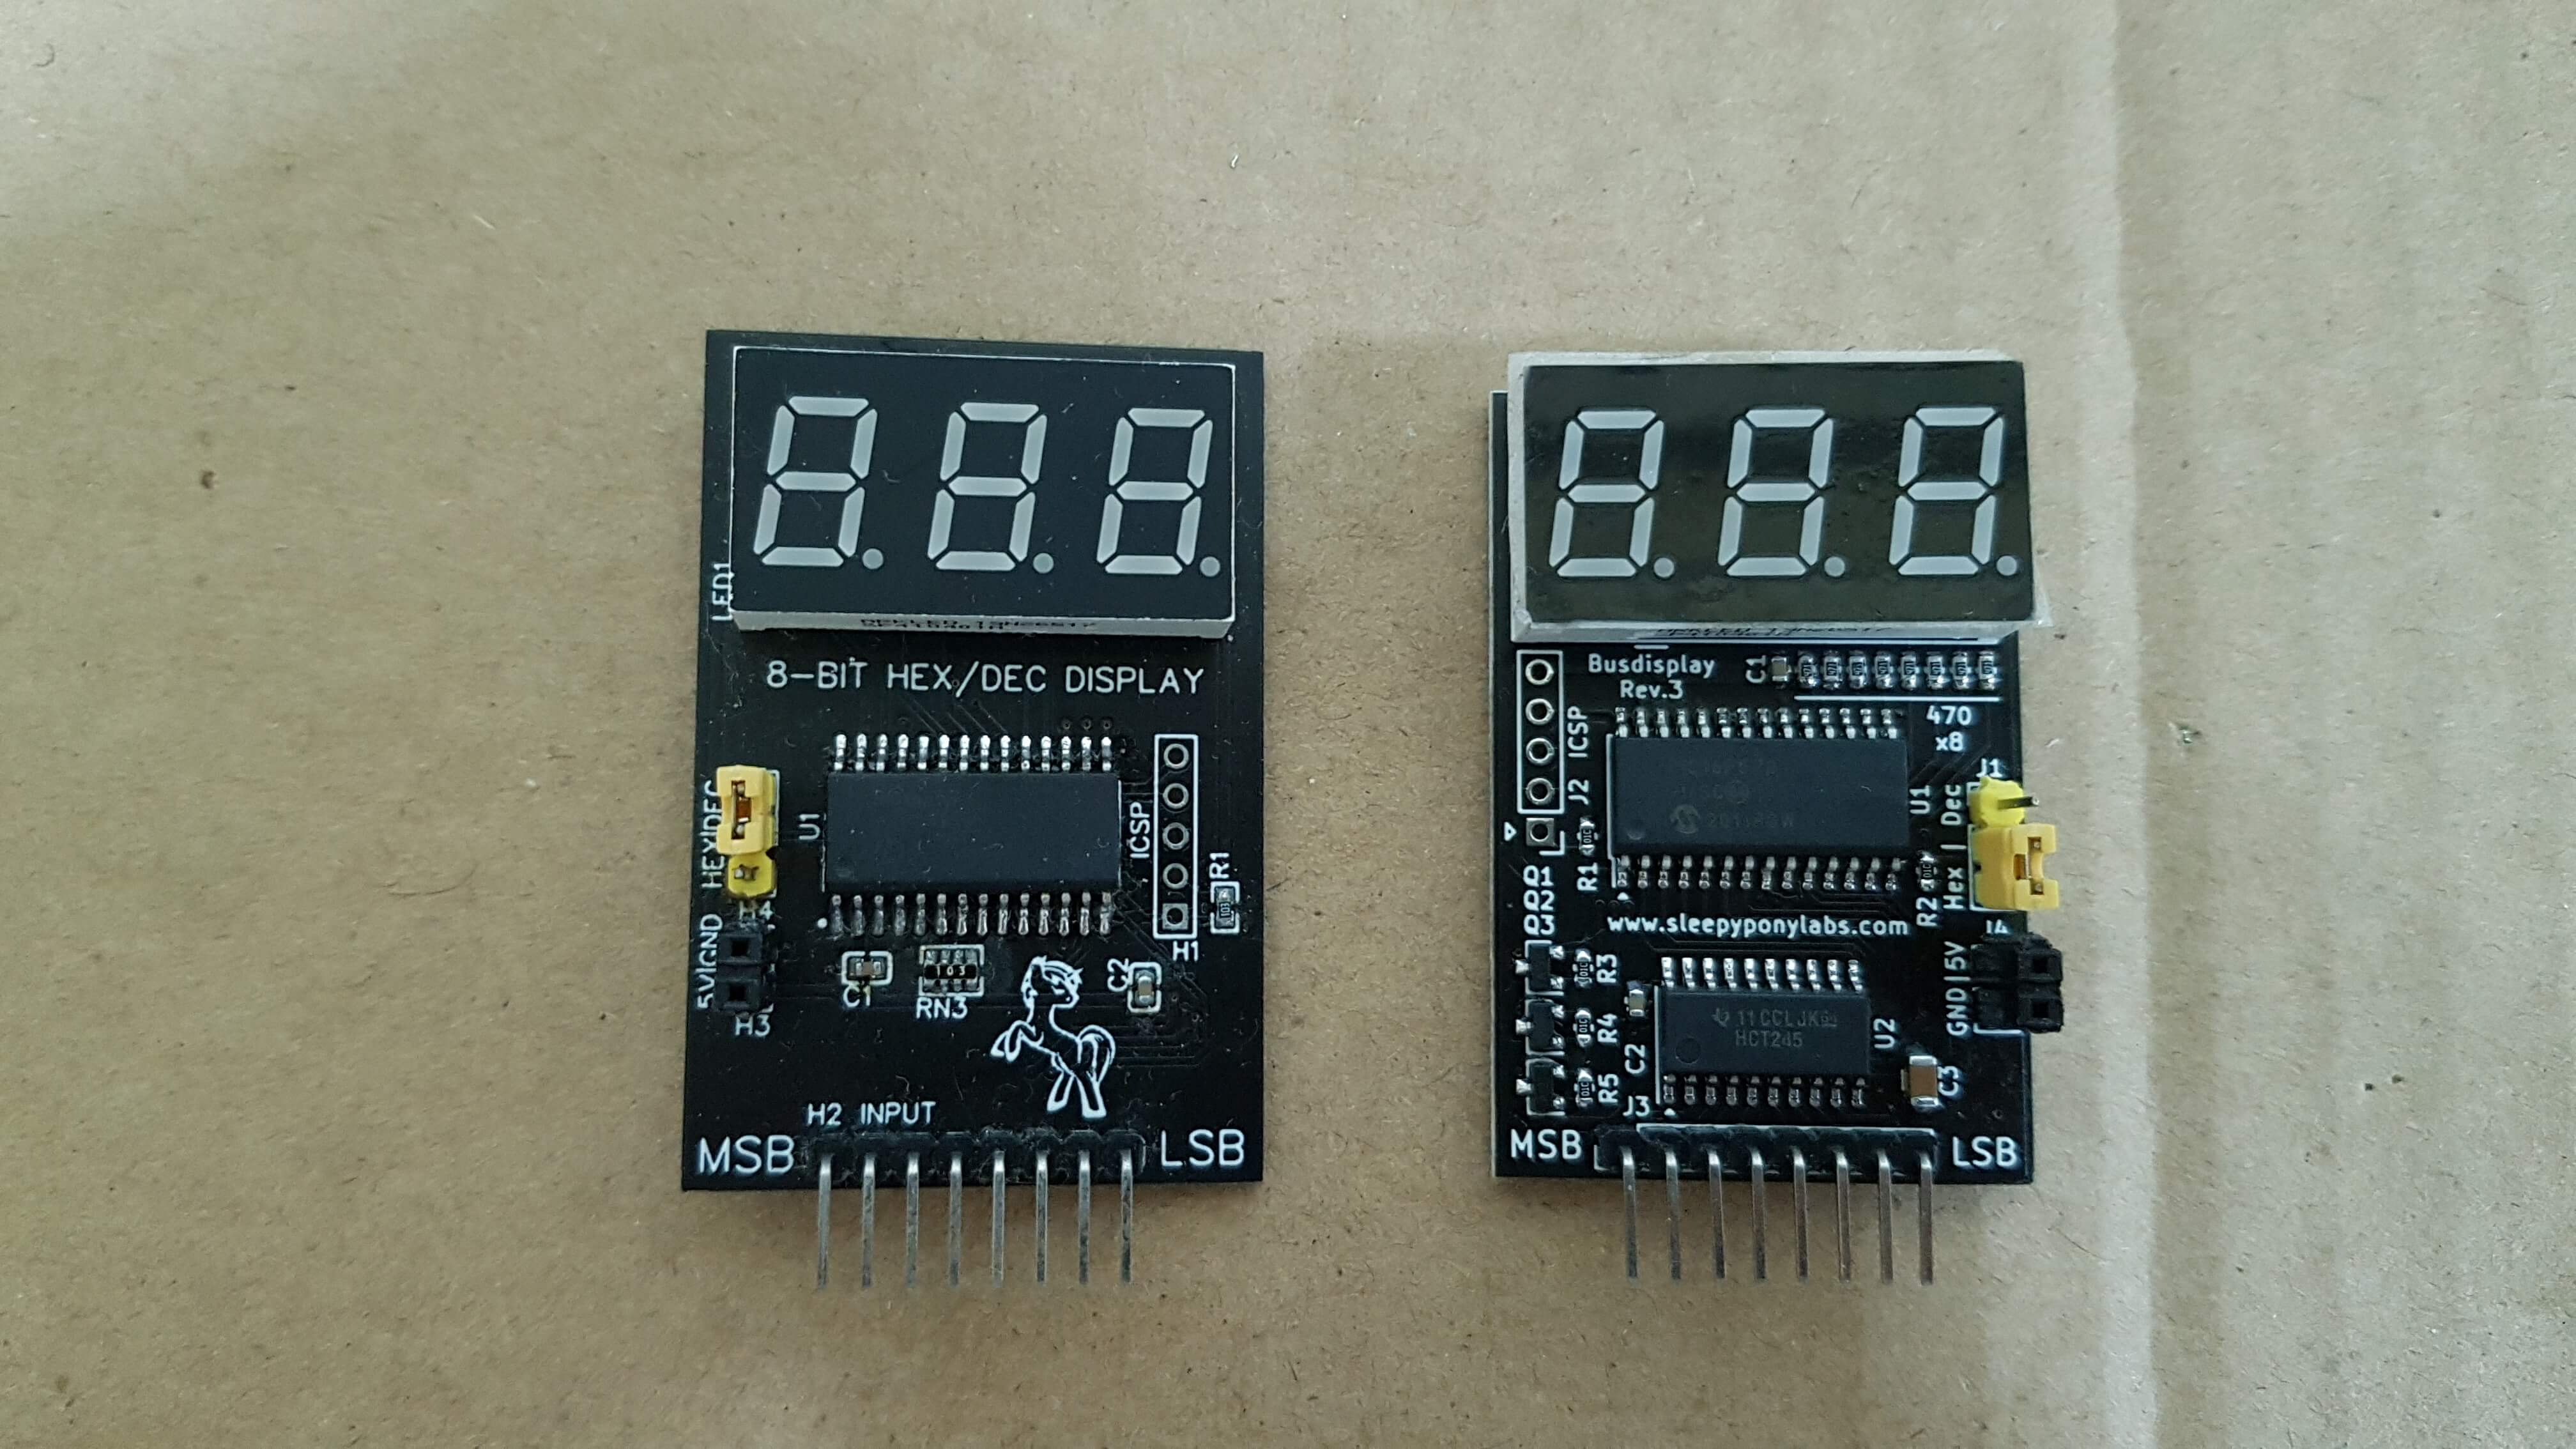 Busdisplay board revision 1 and 3